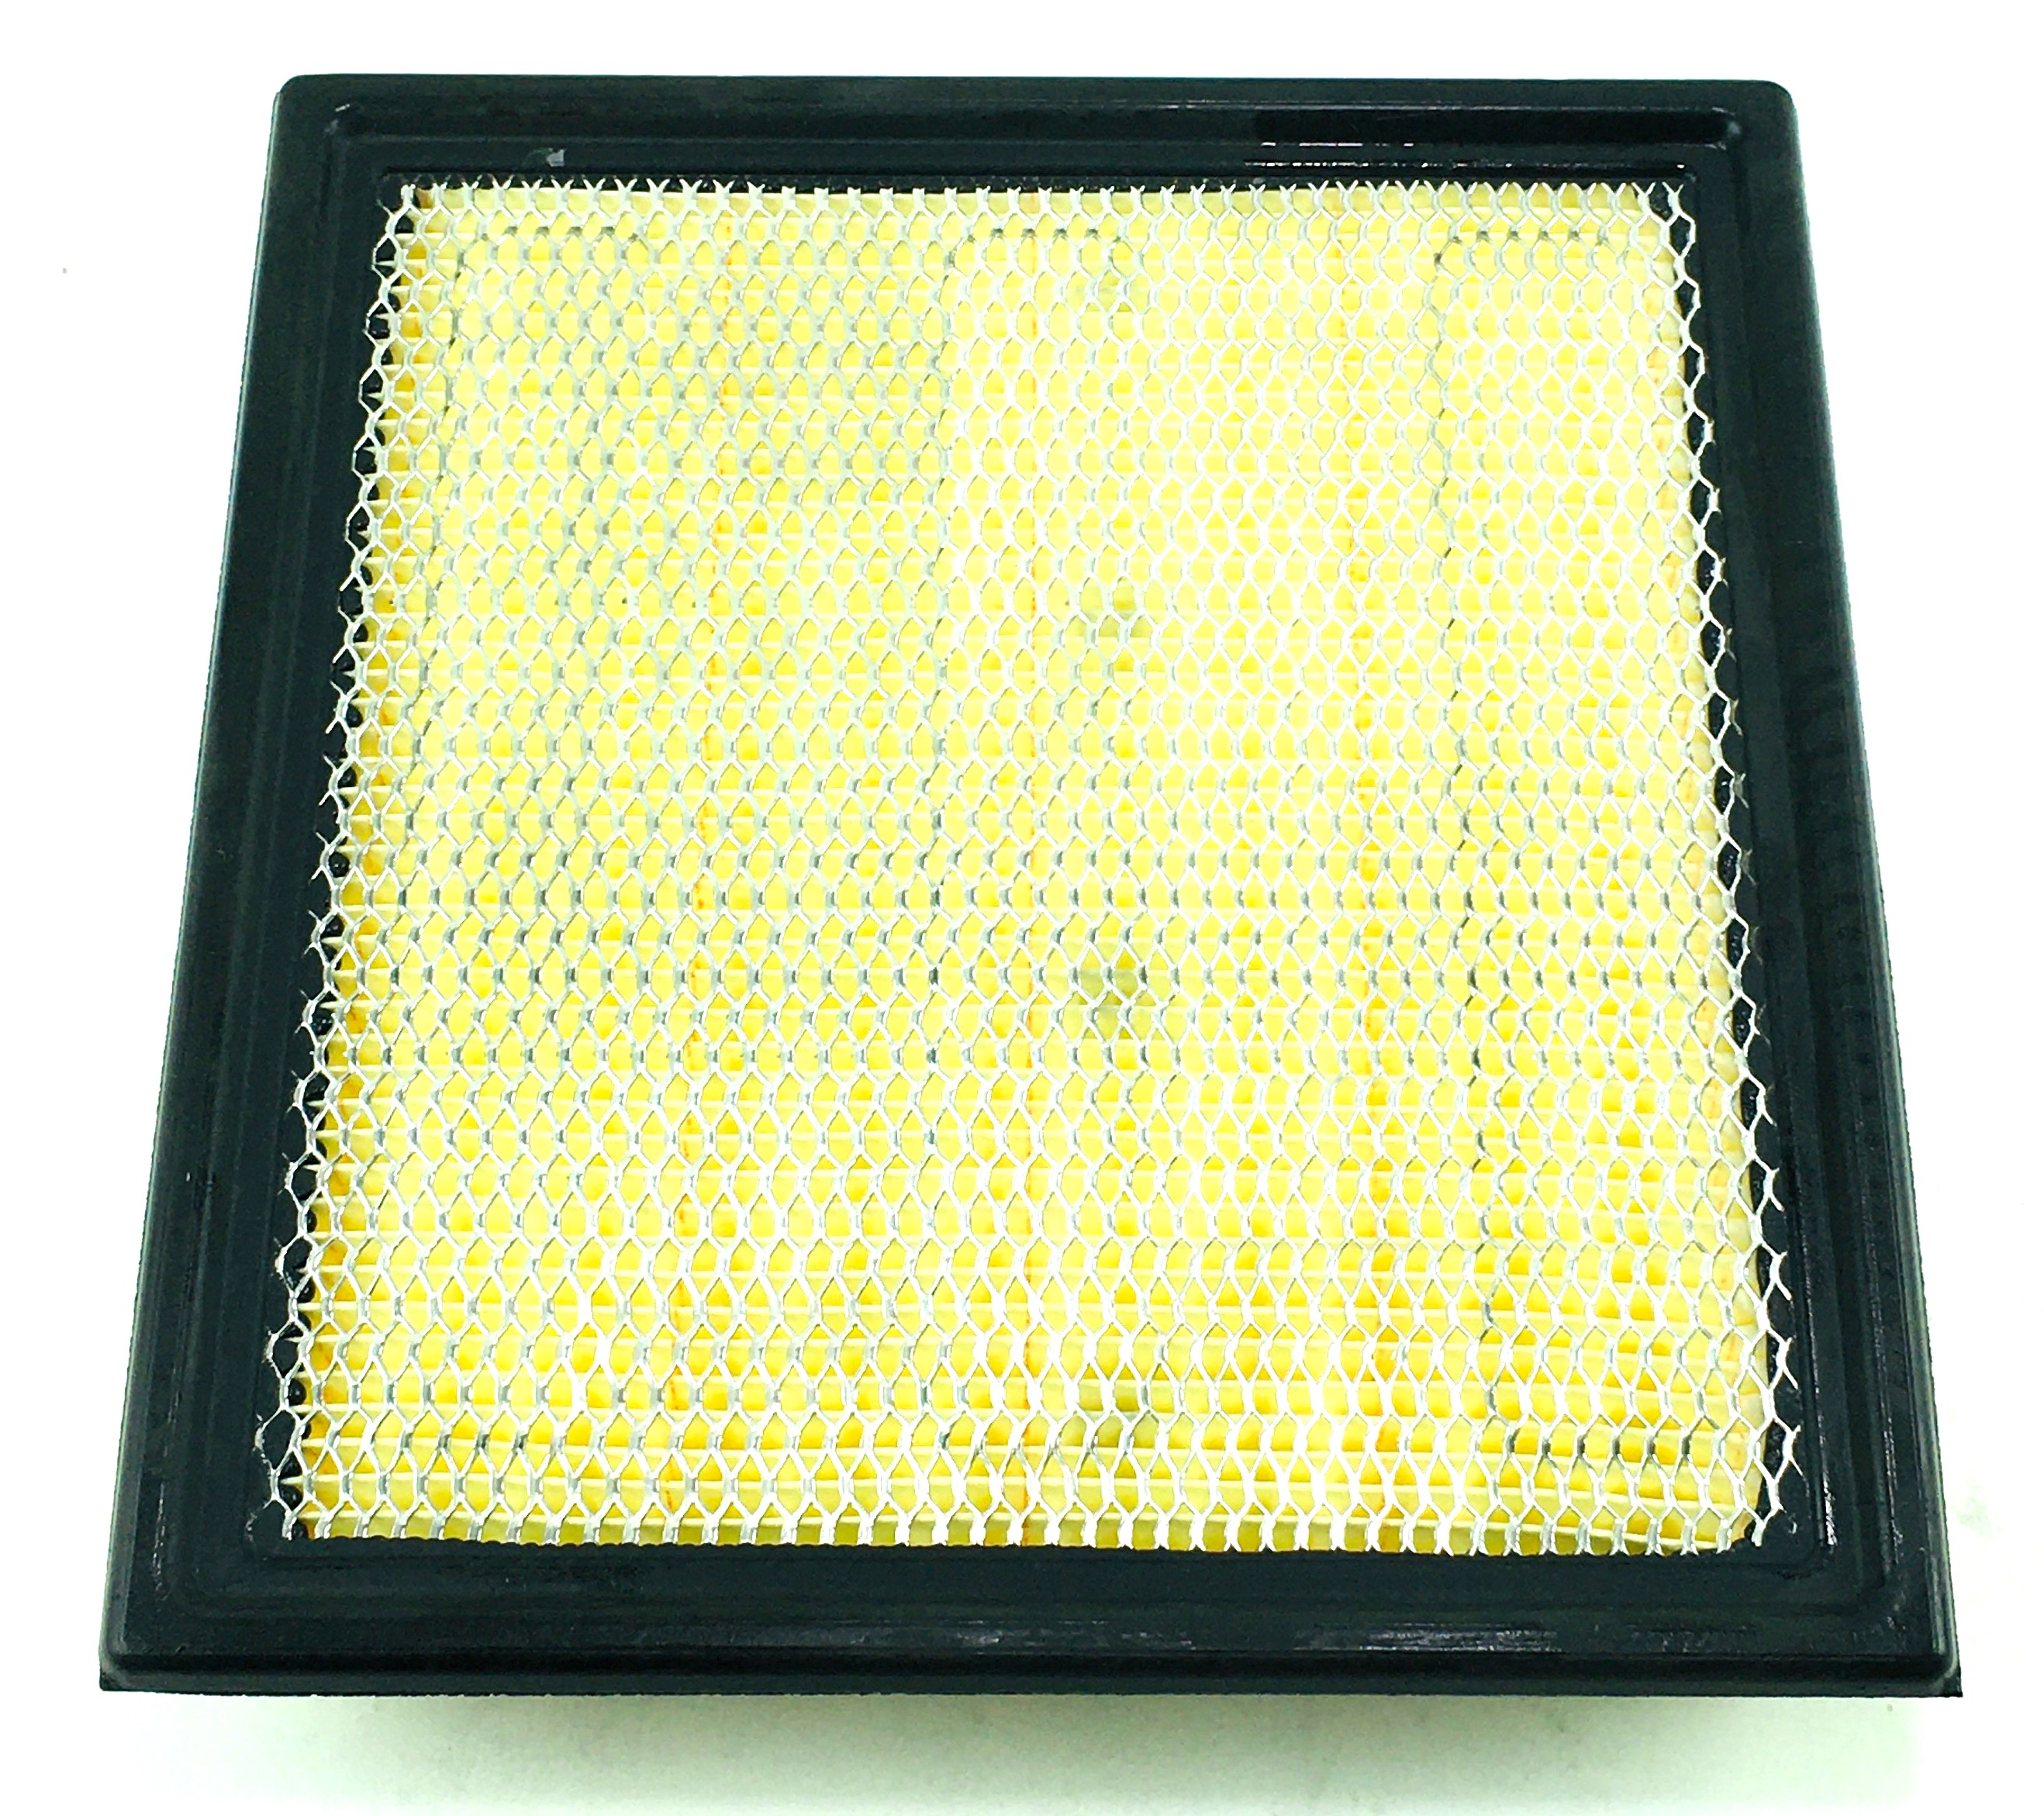 New OEM Motorcraft FA-1883-B7 Ford 7C3Z9601A Genuine Air Filter Free Shipping - image 3